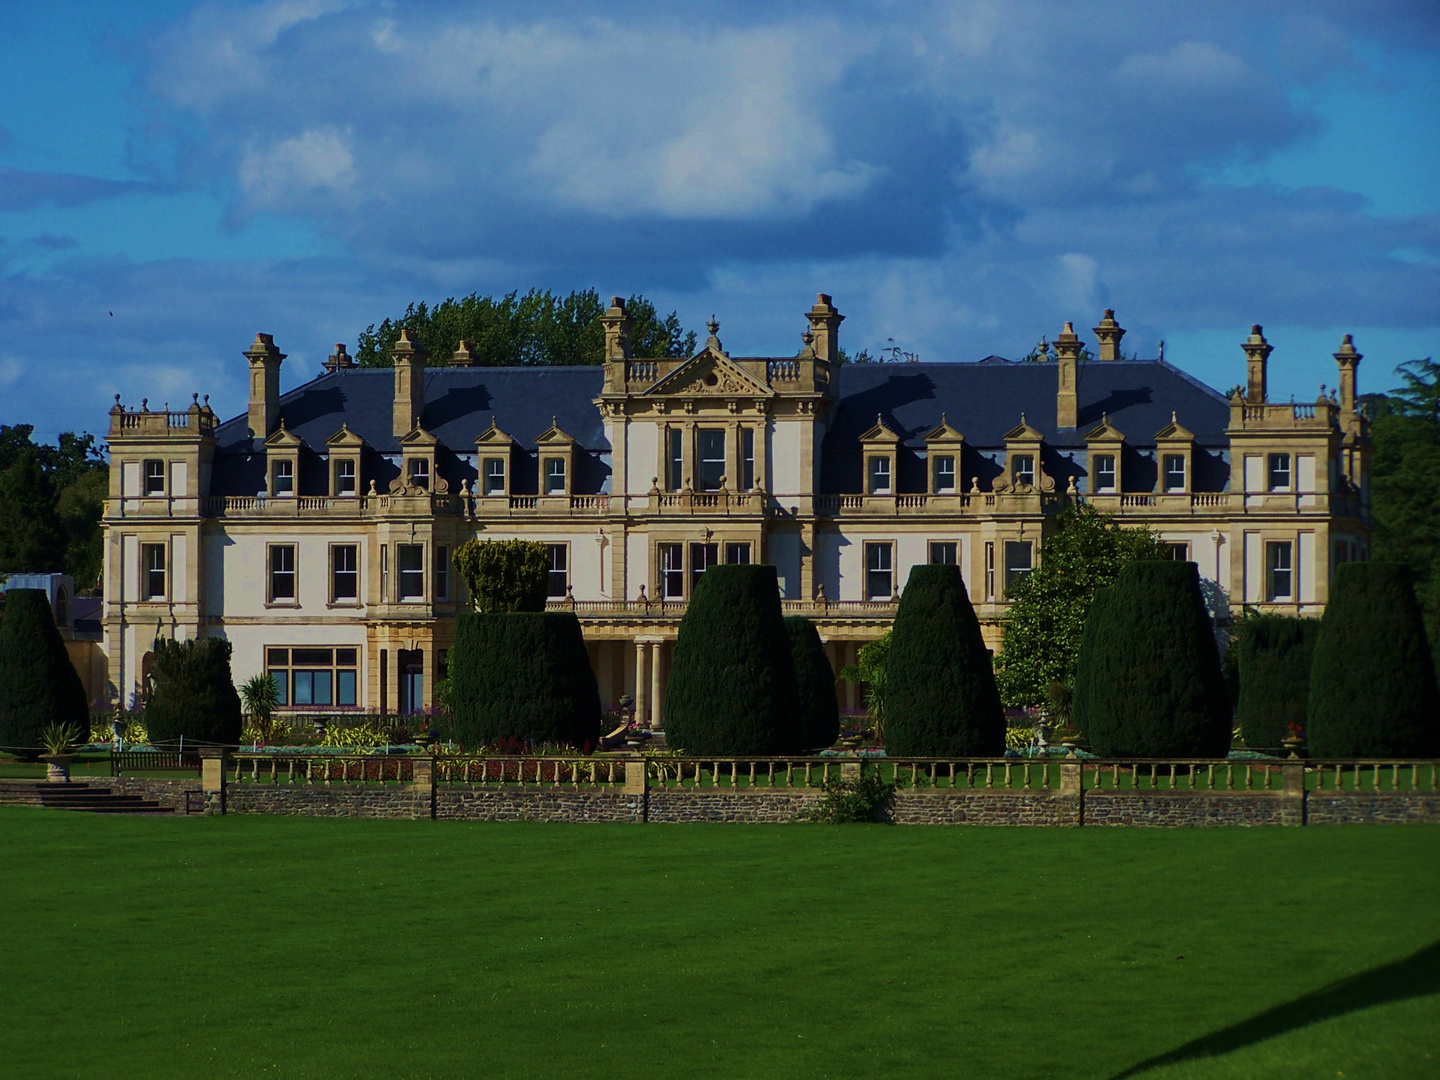 Duffryn house and gardens